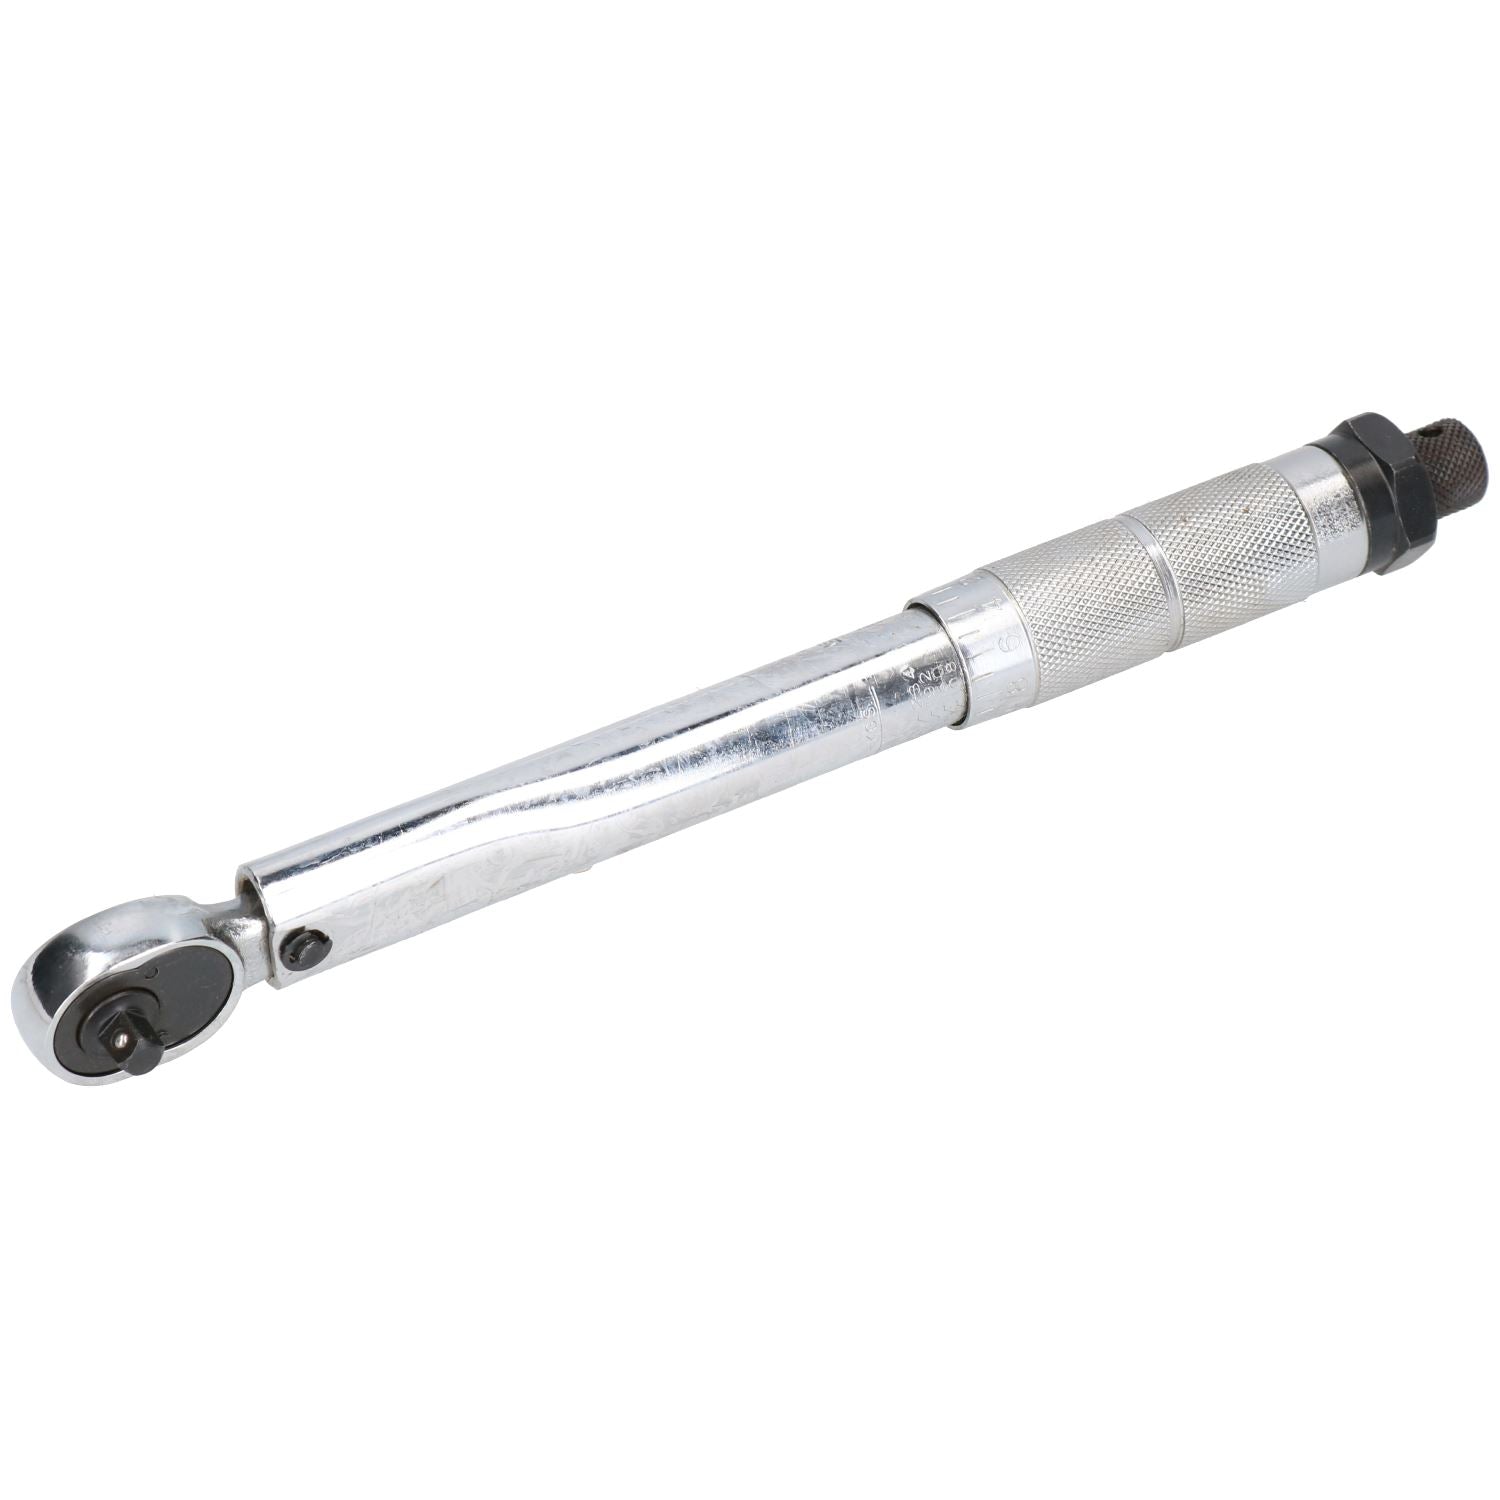 1/4" Drive Torque Wrench 5 - 25 Nm + Metric 6 Sided Deep Sockets 4 - 14mm